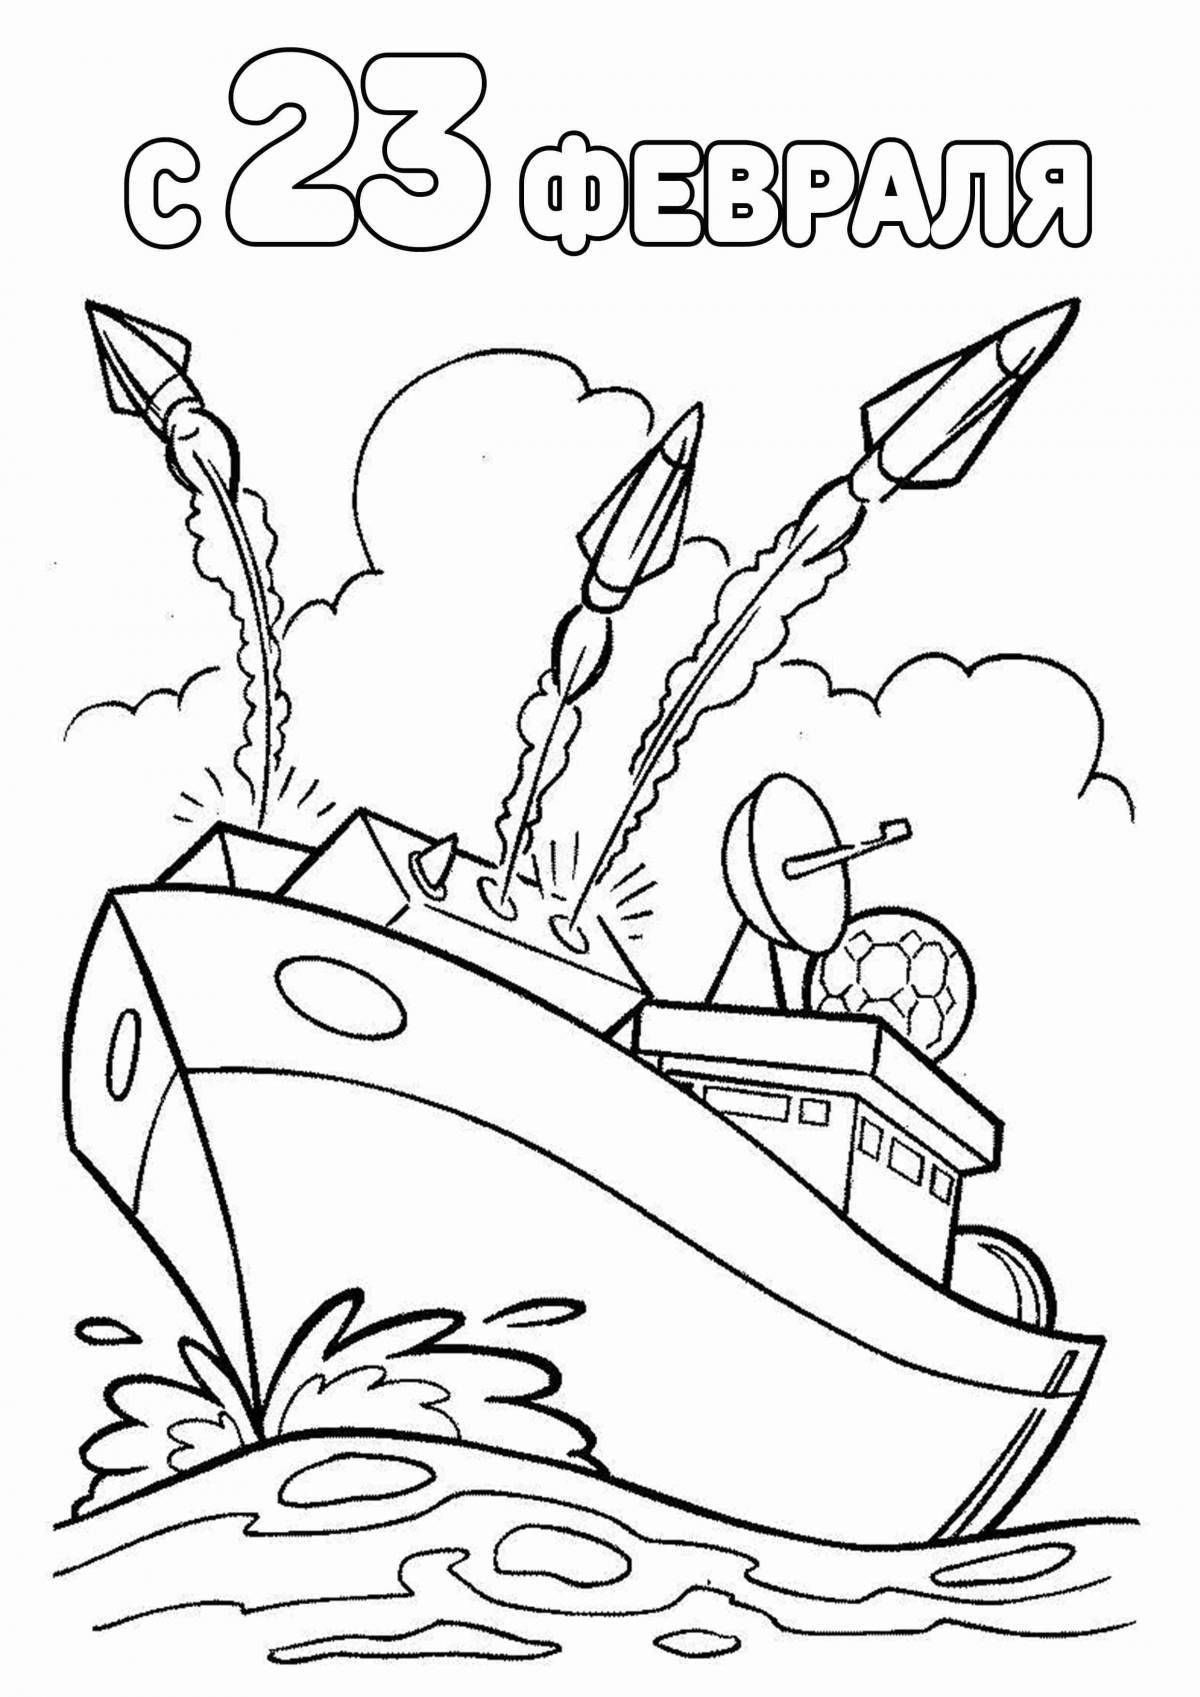 Serene coloring page for February 23 for adults